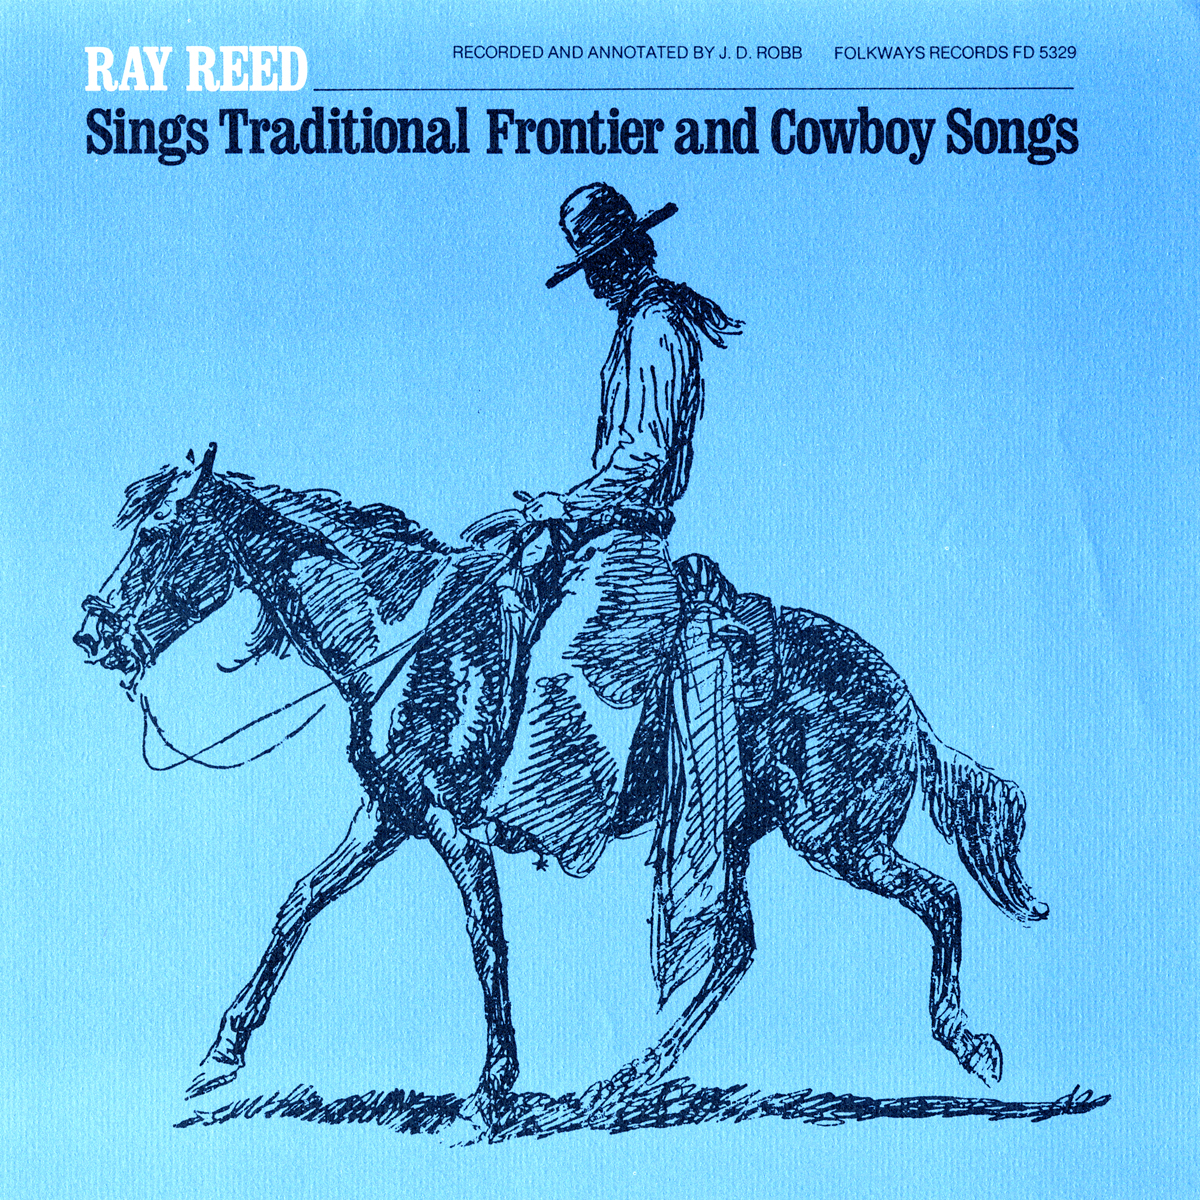 RAY REED SINGS TRADITIONAL FRONTIER &COWBOY SONGS